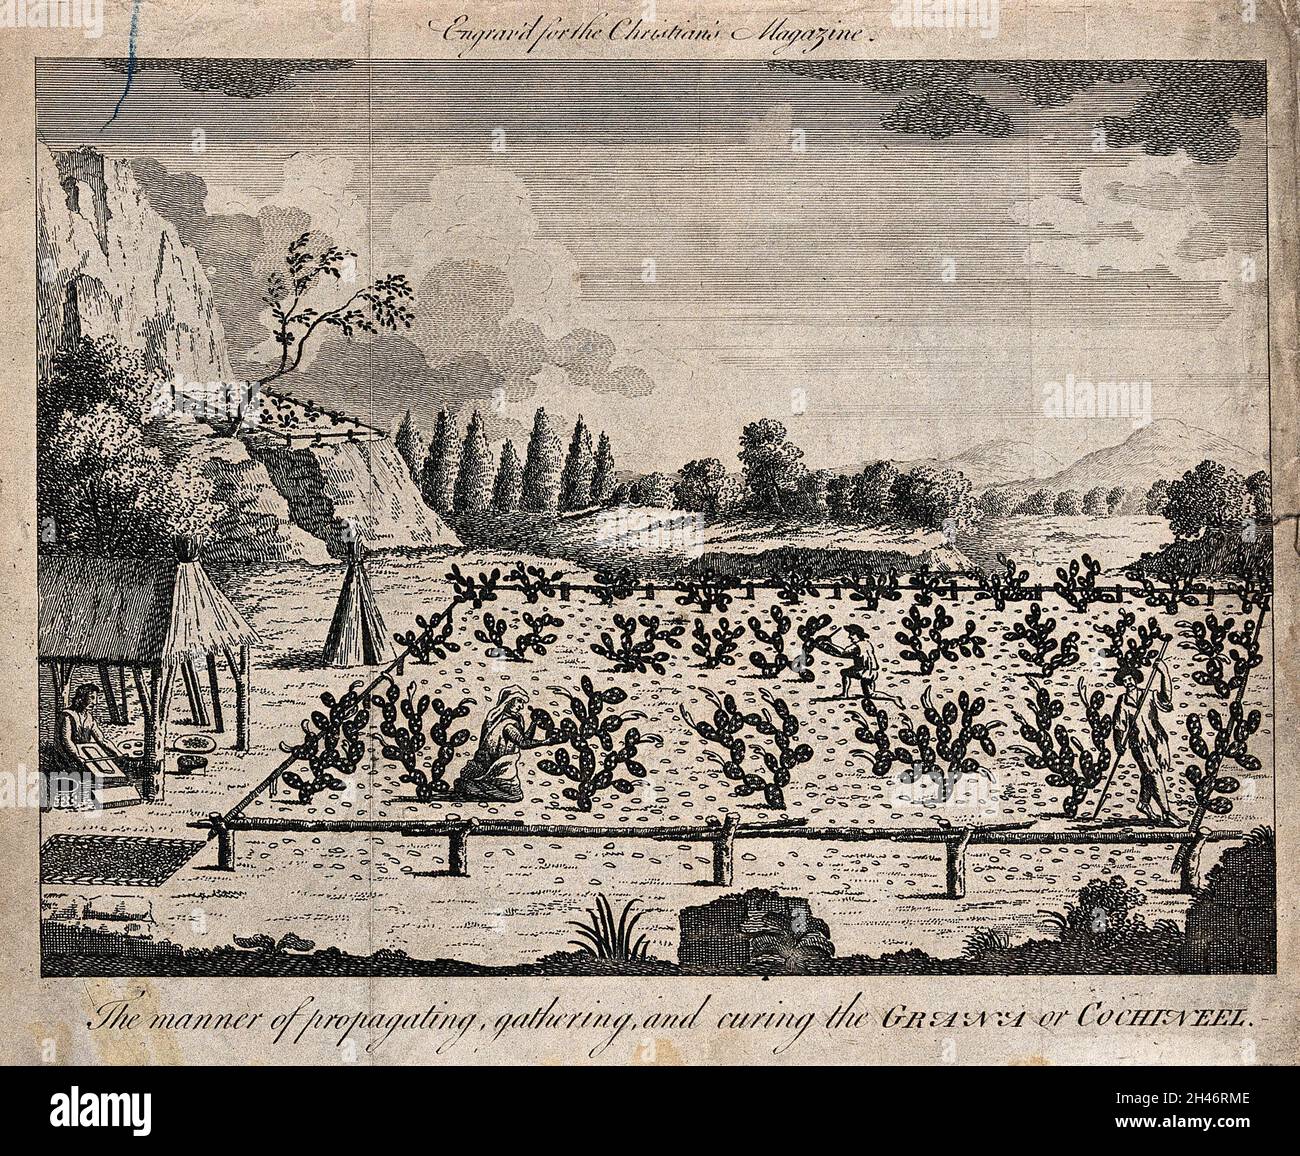 A plantation of cochineal cacti (Nopalea cochenillifera) with workers gathering and preparing cochineal. Engraving. Stock Photo